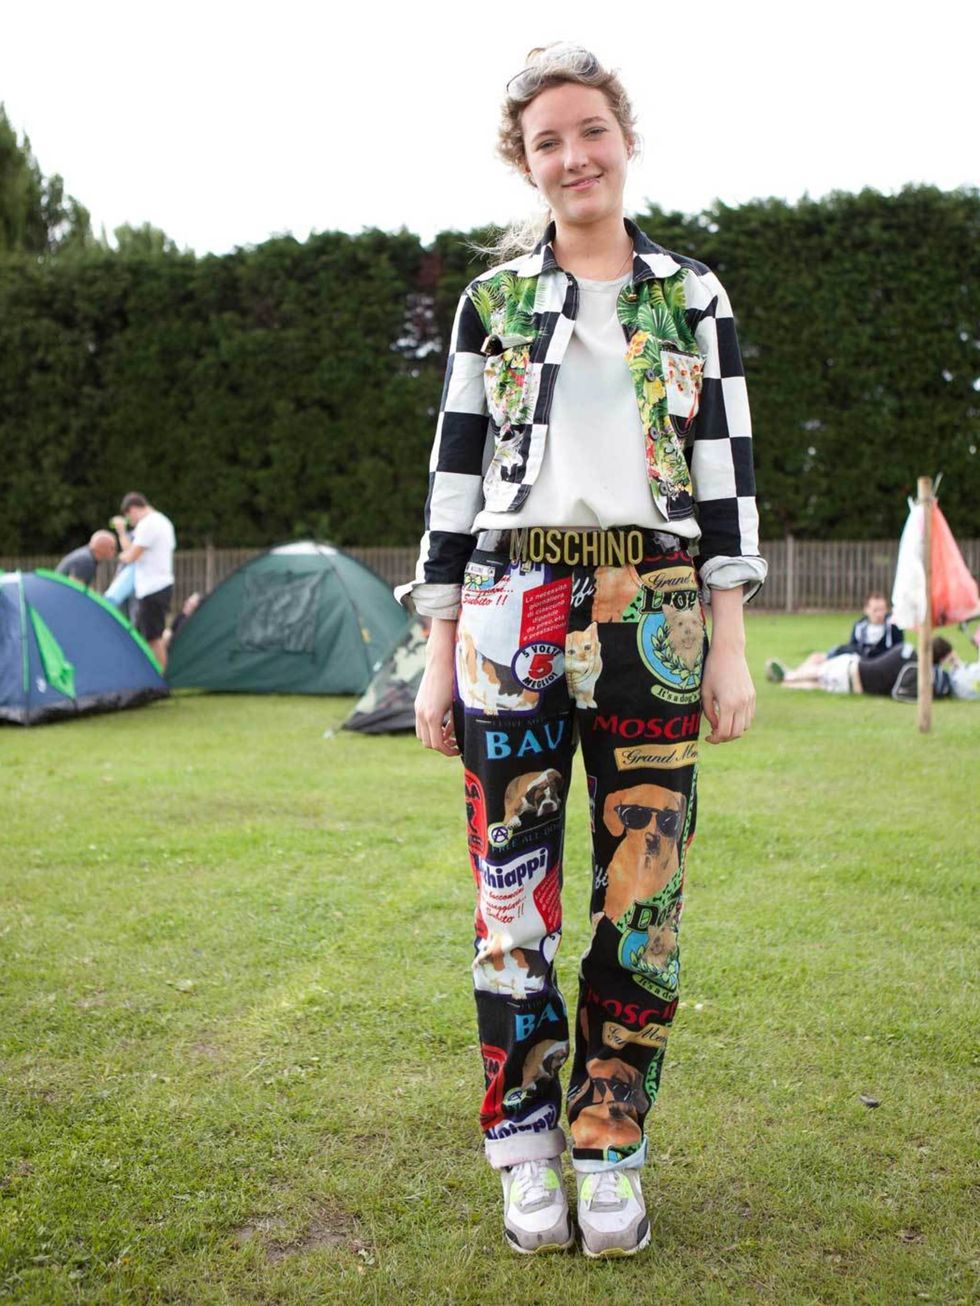 <p>Amy Sorrs, 20, Visual Merchandiser at Alexander McQueen. Versace jacket, vintage top, Moschino jeans and belt, Nike shoes.</p><p>Photo by Laura McCluskey</p>